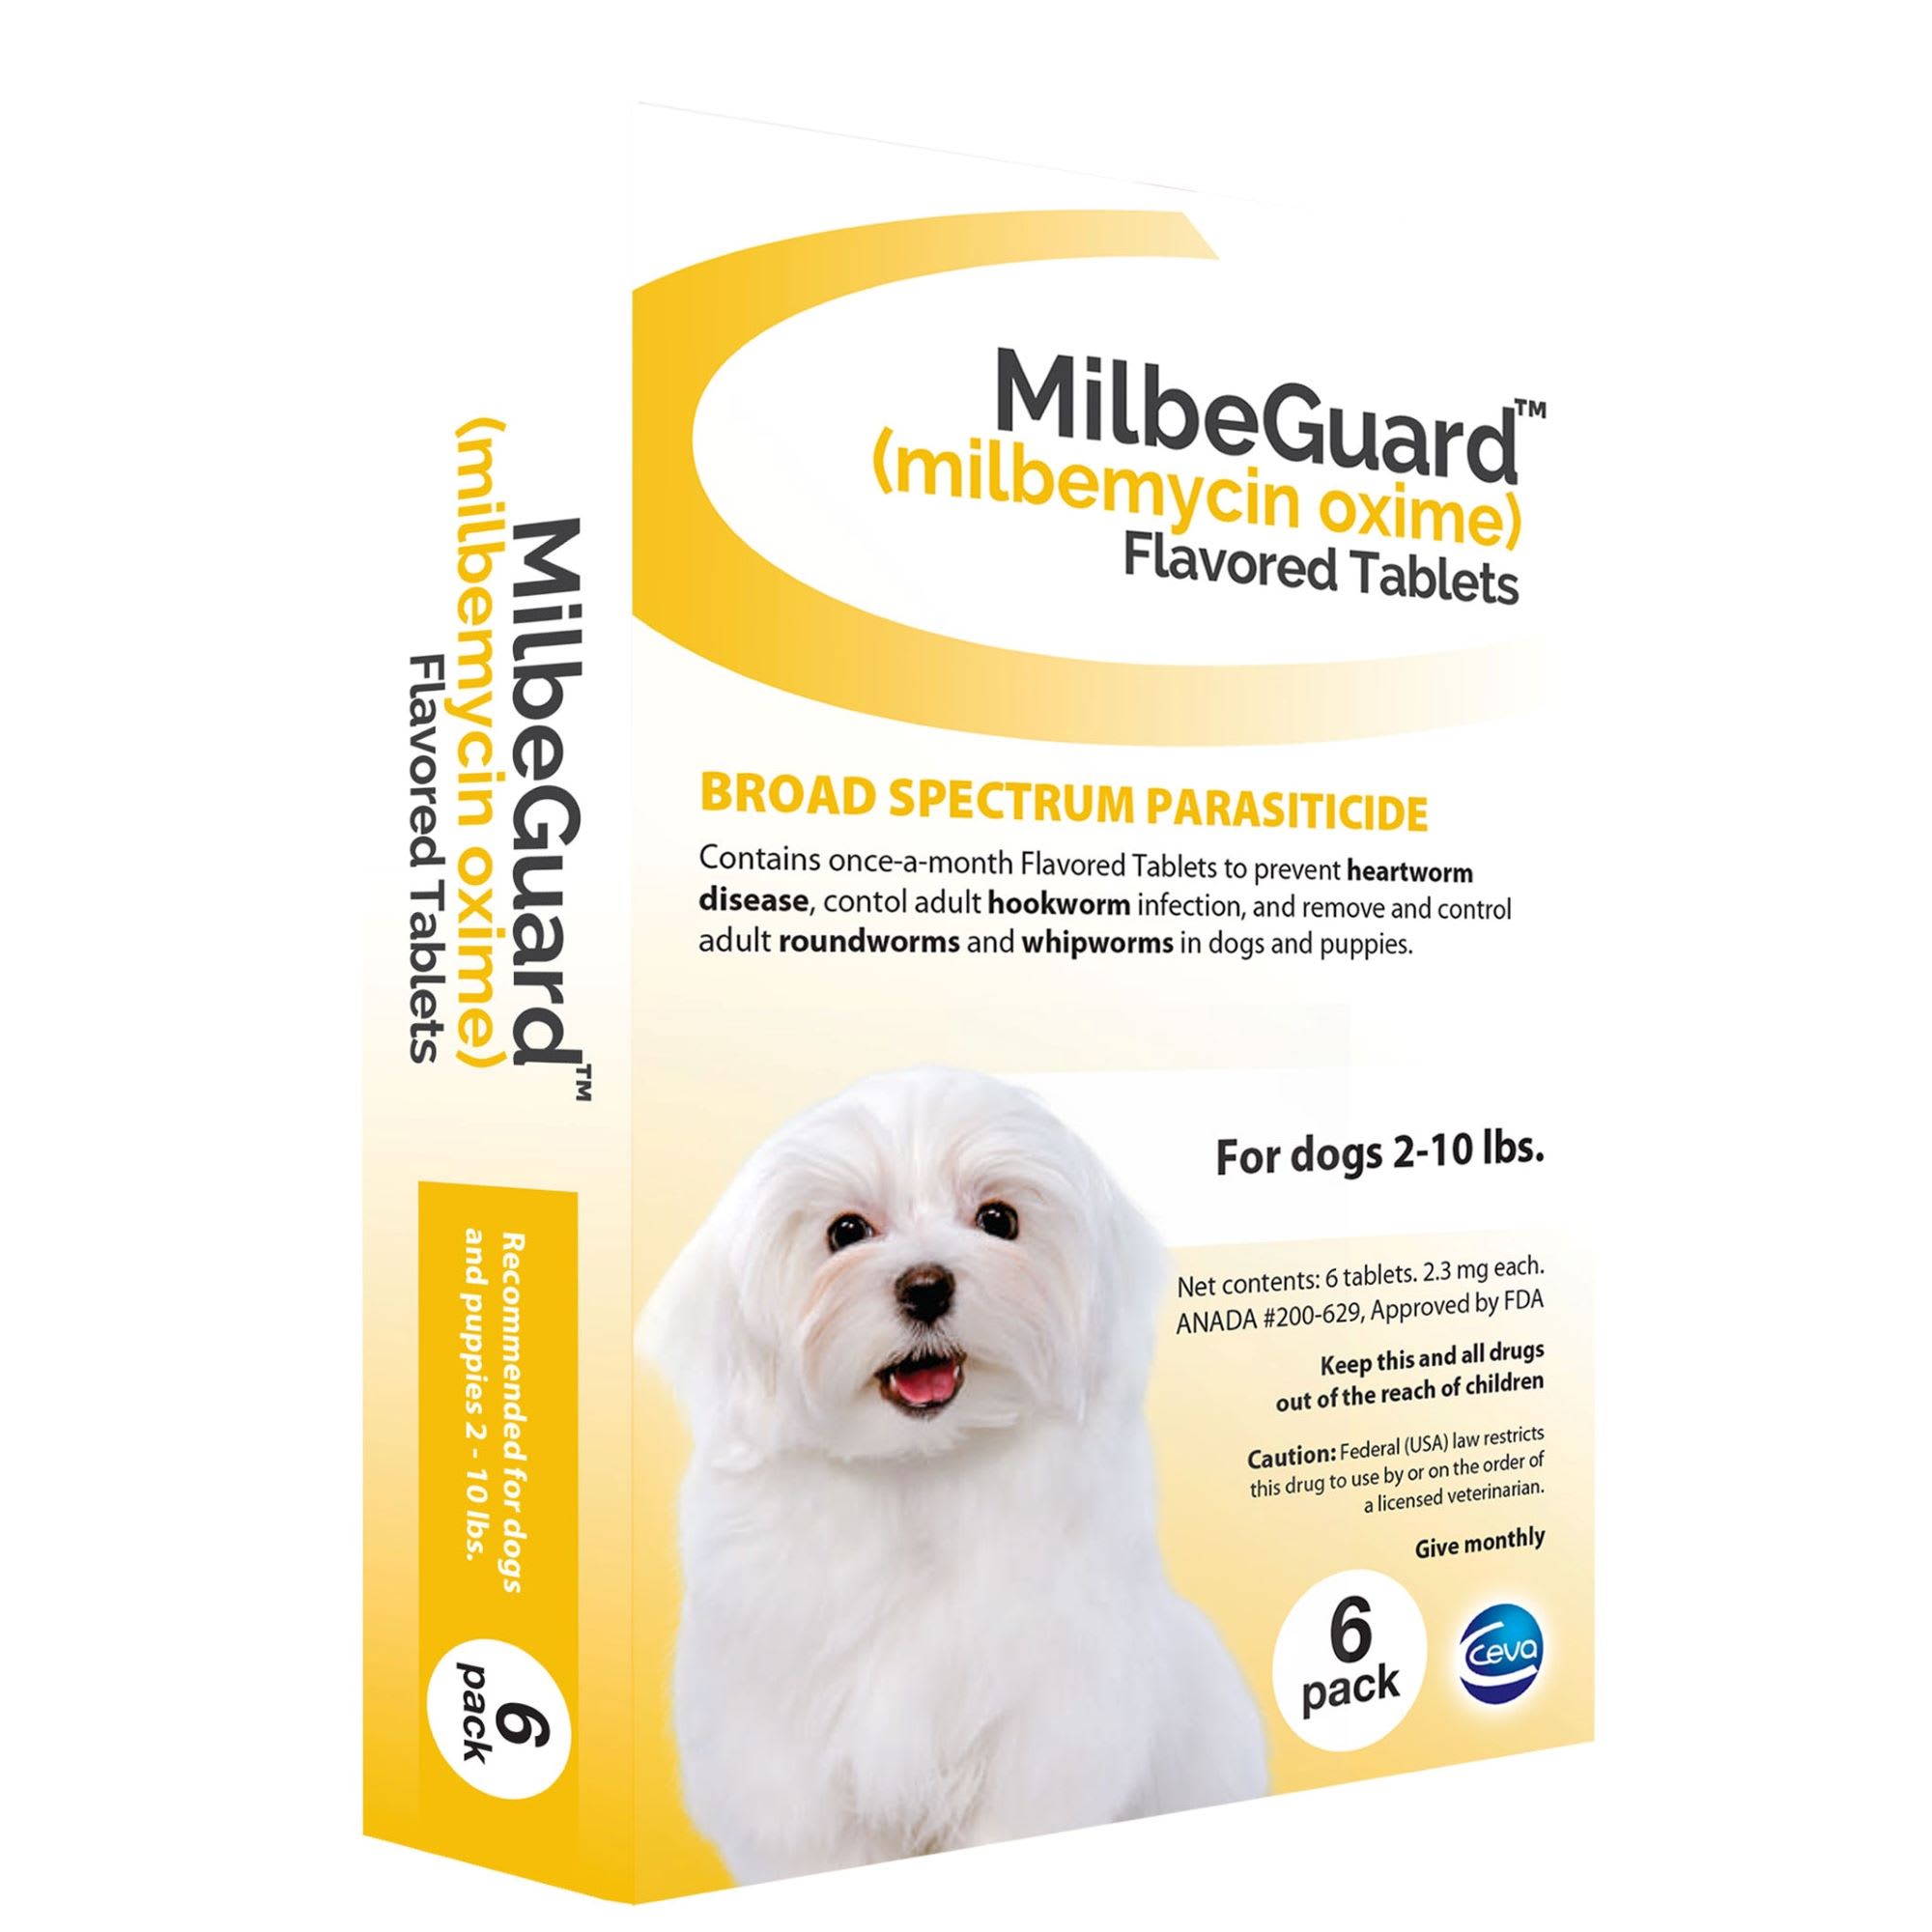 MilbeGuard Flavored Tablets for Dogs 2 to 10 lbs, 6 Month Supply